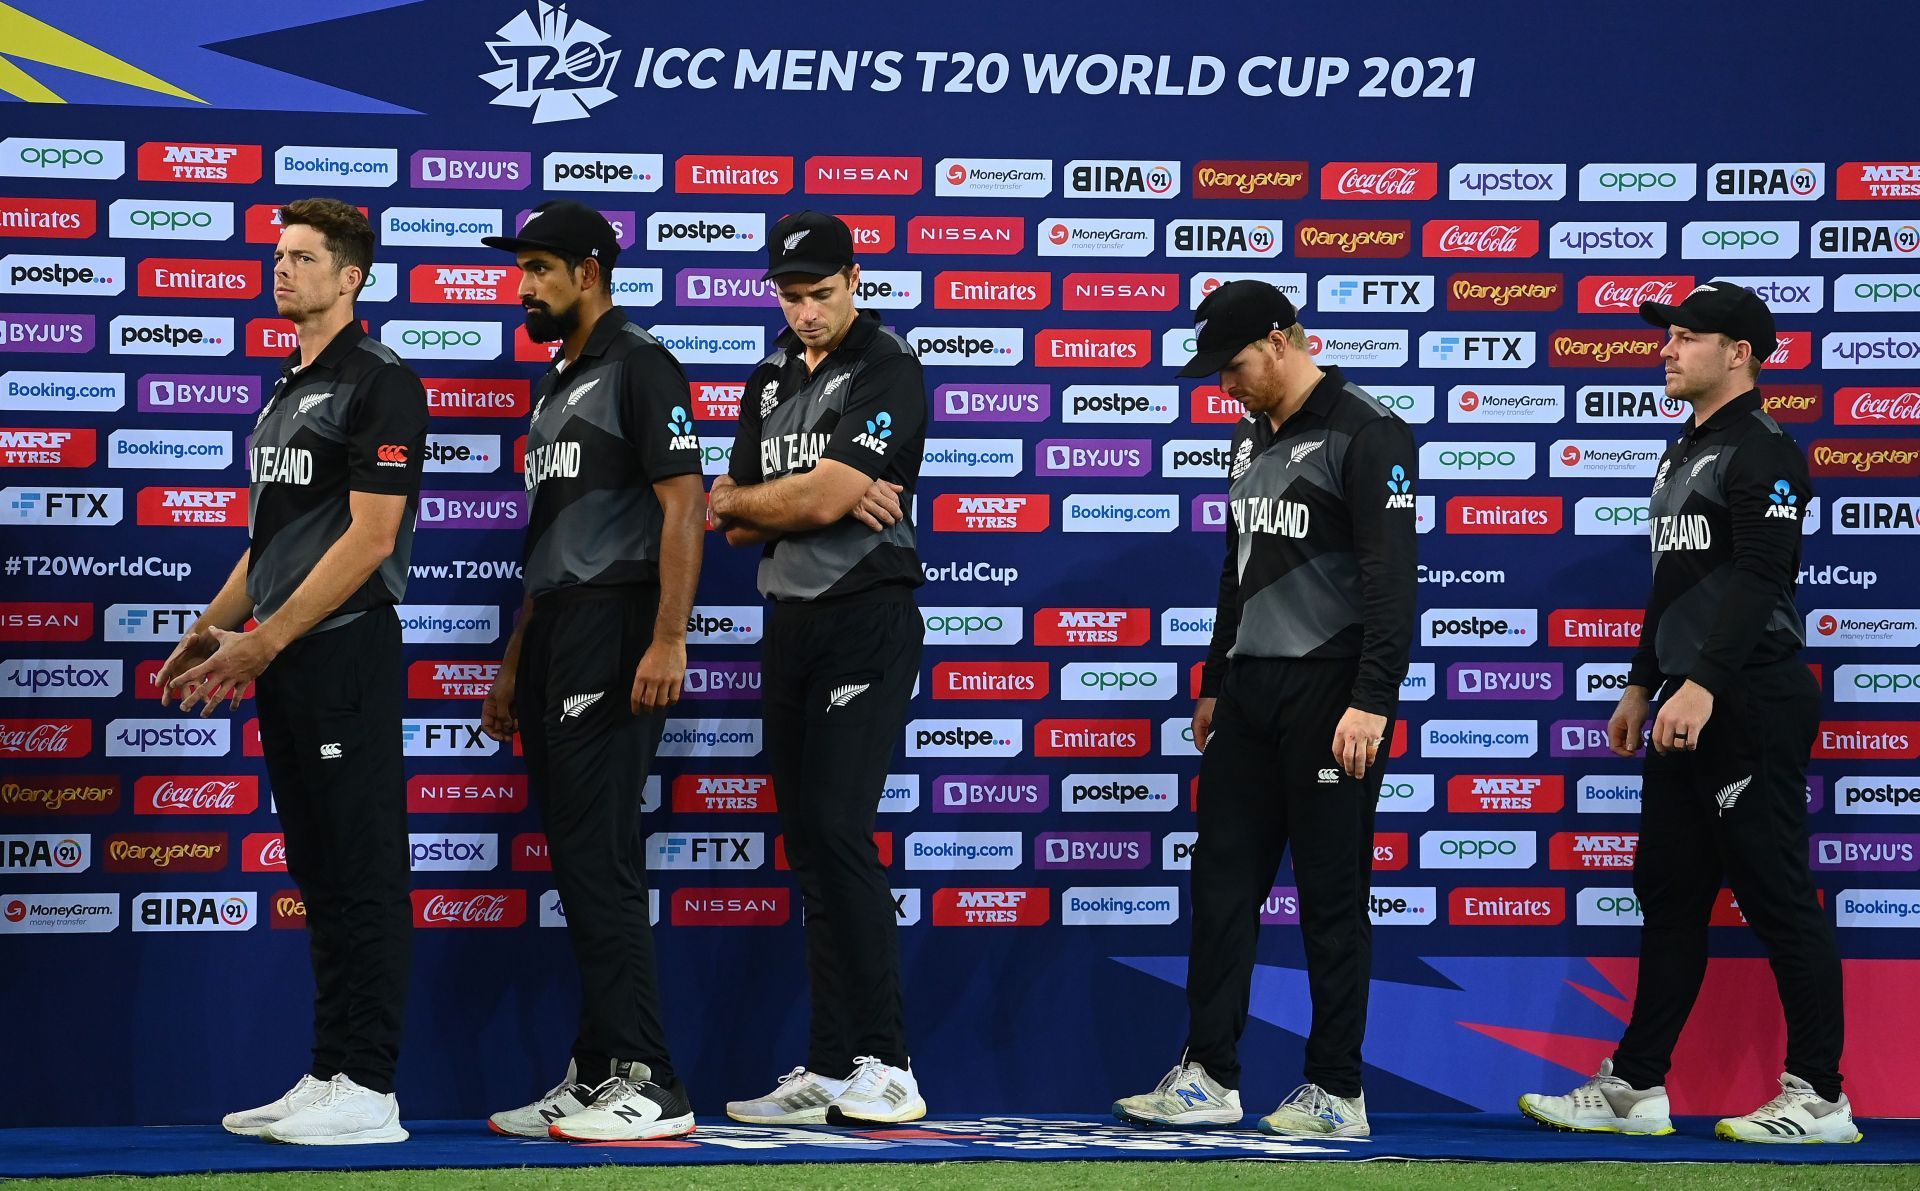 New Zealand will hope to win a limited-overs World Cup for the first time.